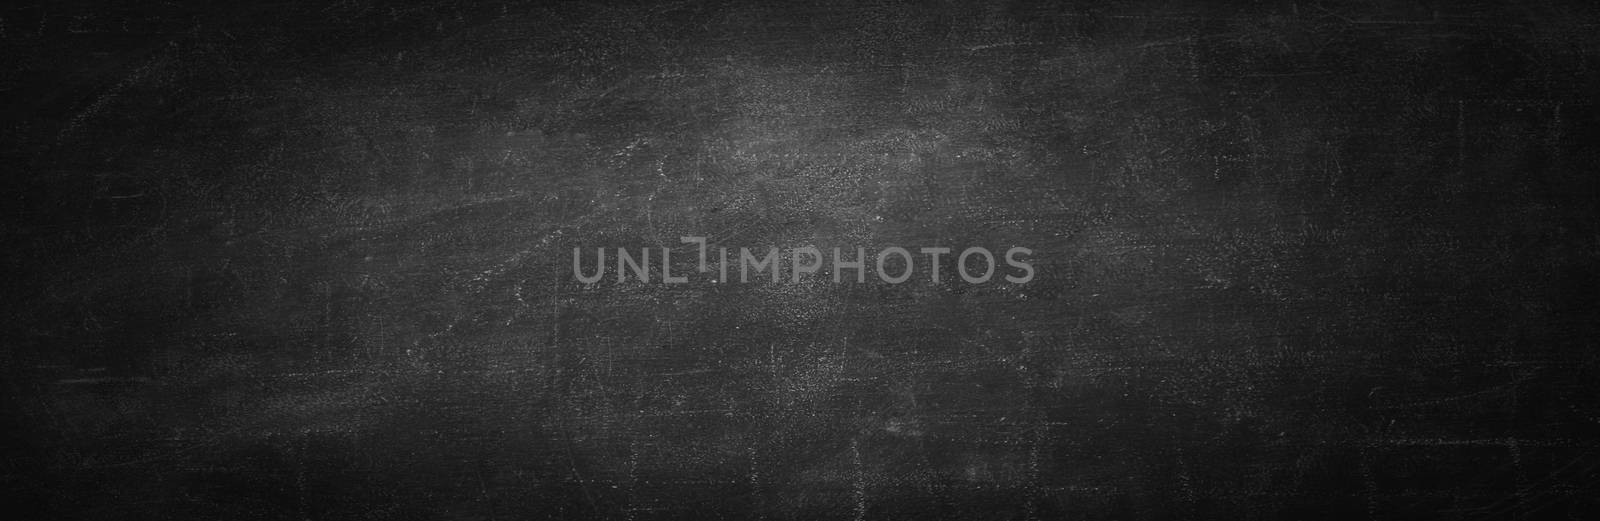 blackboard texture and black background, copy space horizontal wall